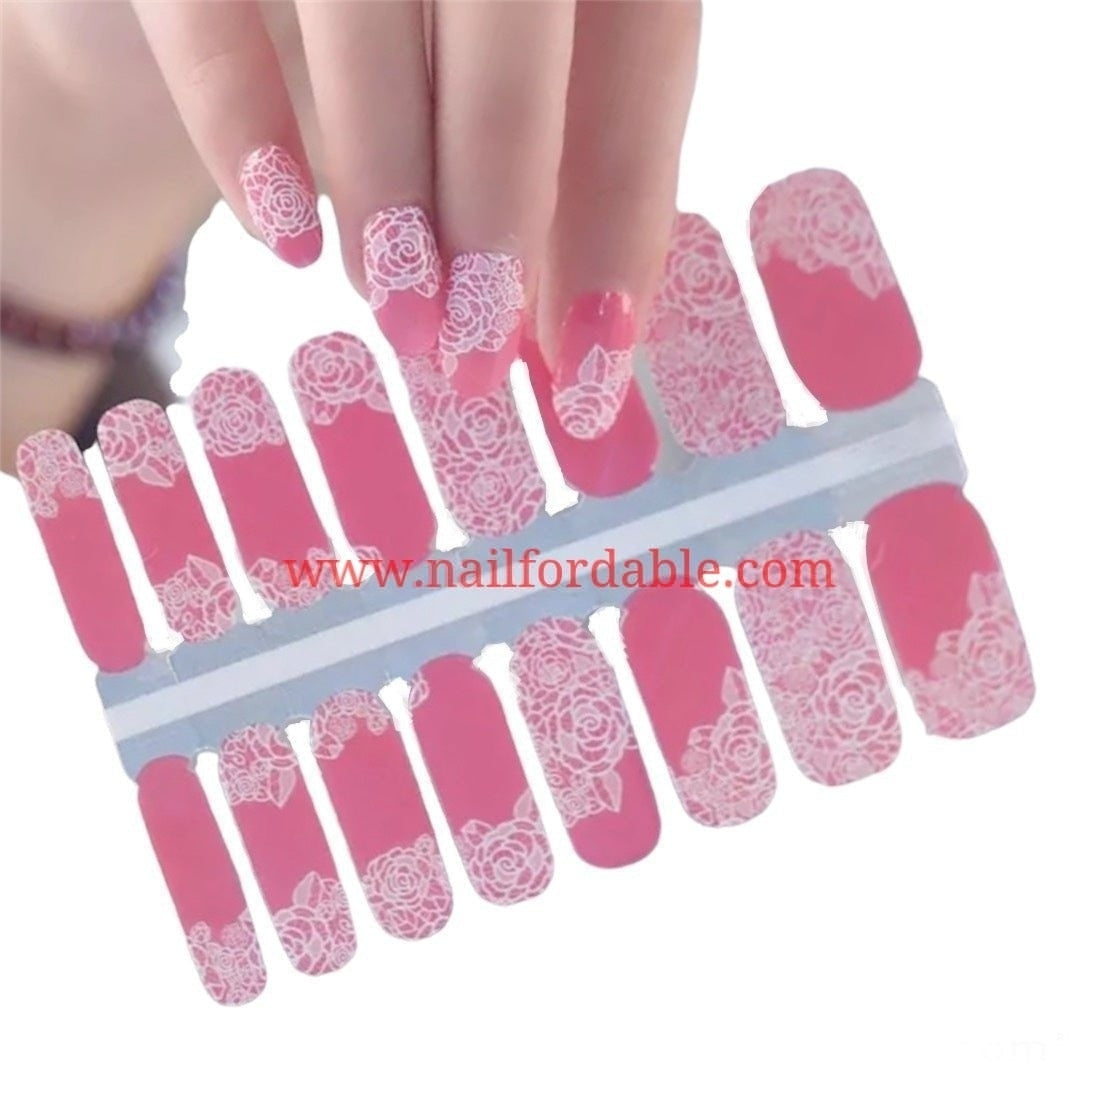 White roses lace Nail Wraps | Semi Cured Gel Wraps | Gel Nail Wraps |Nail Polish | Nail Stickers